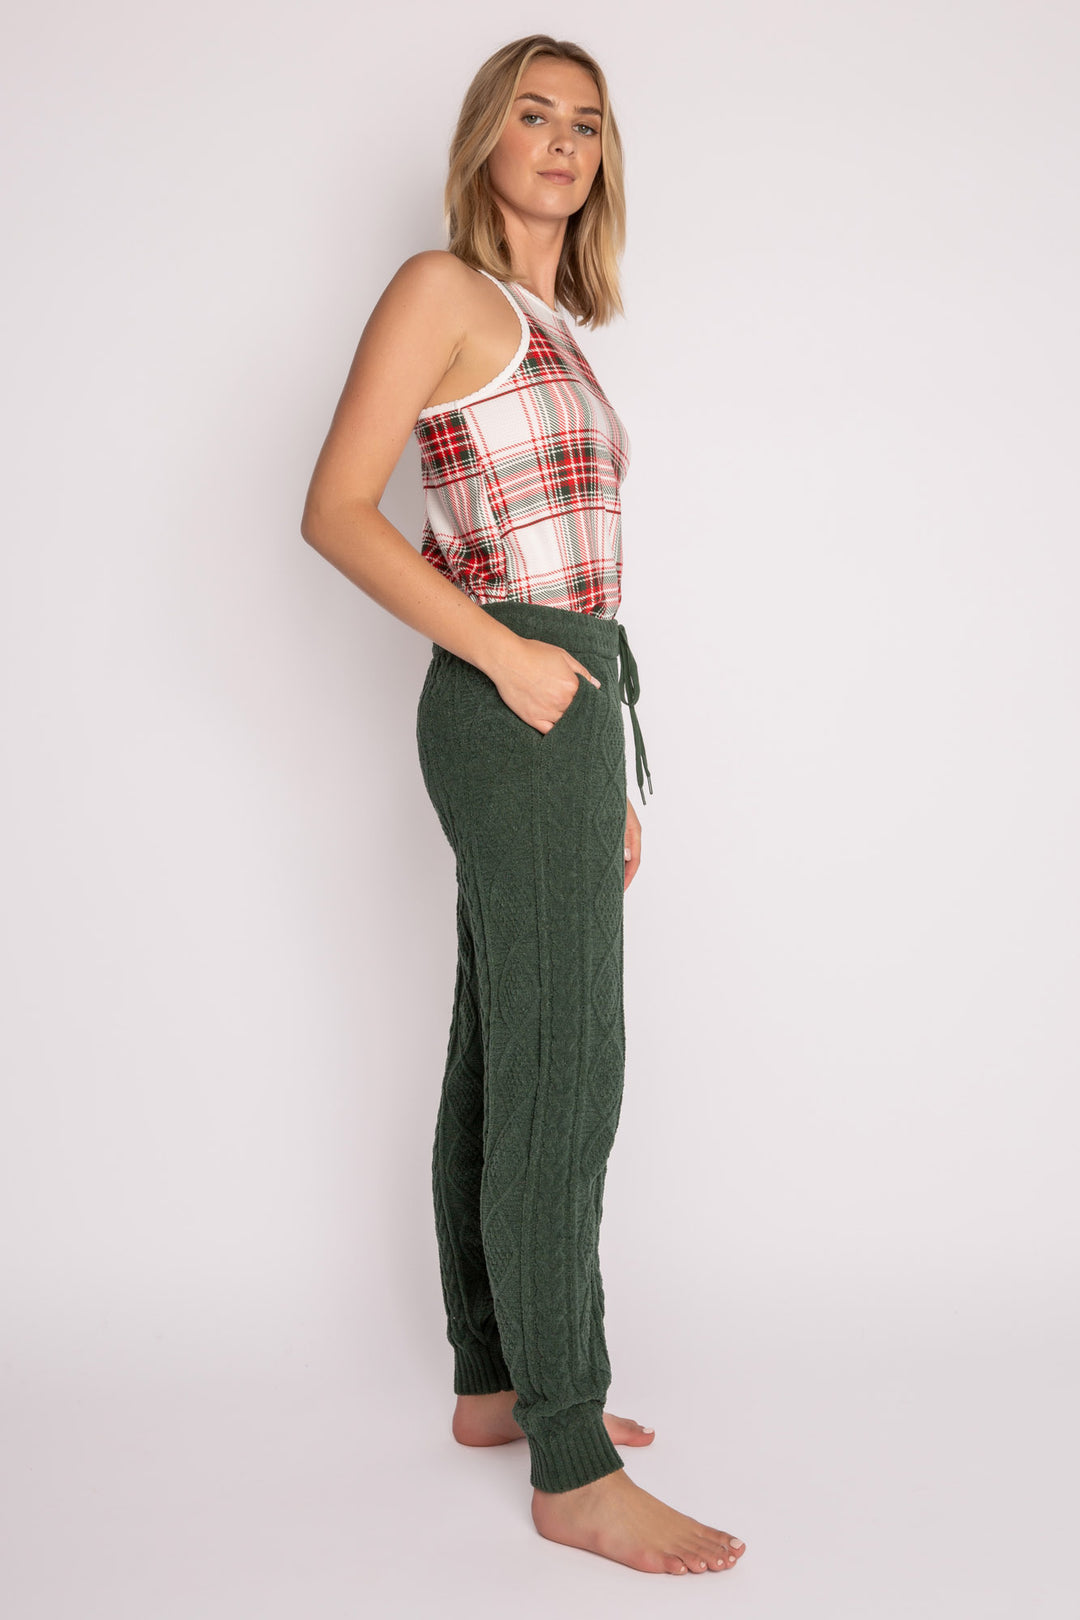 Banded sweater pant in dark green chenille knit with cable pattern. Relaxed fit with rib & tie waist. (7257679462500)